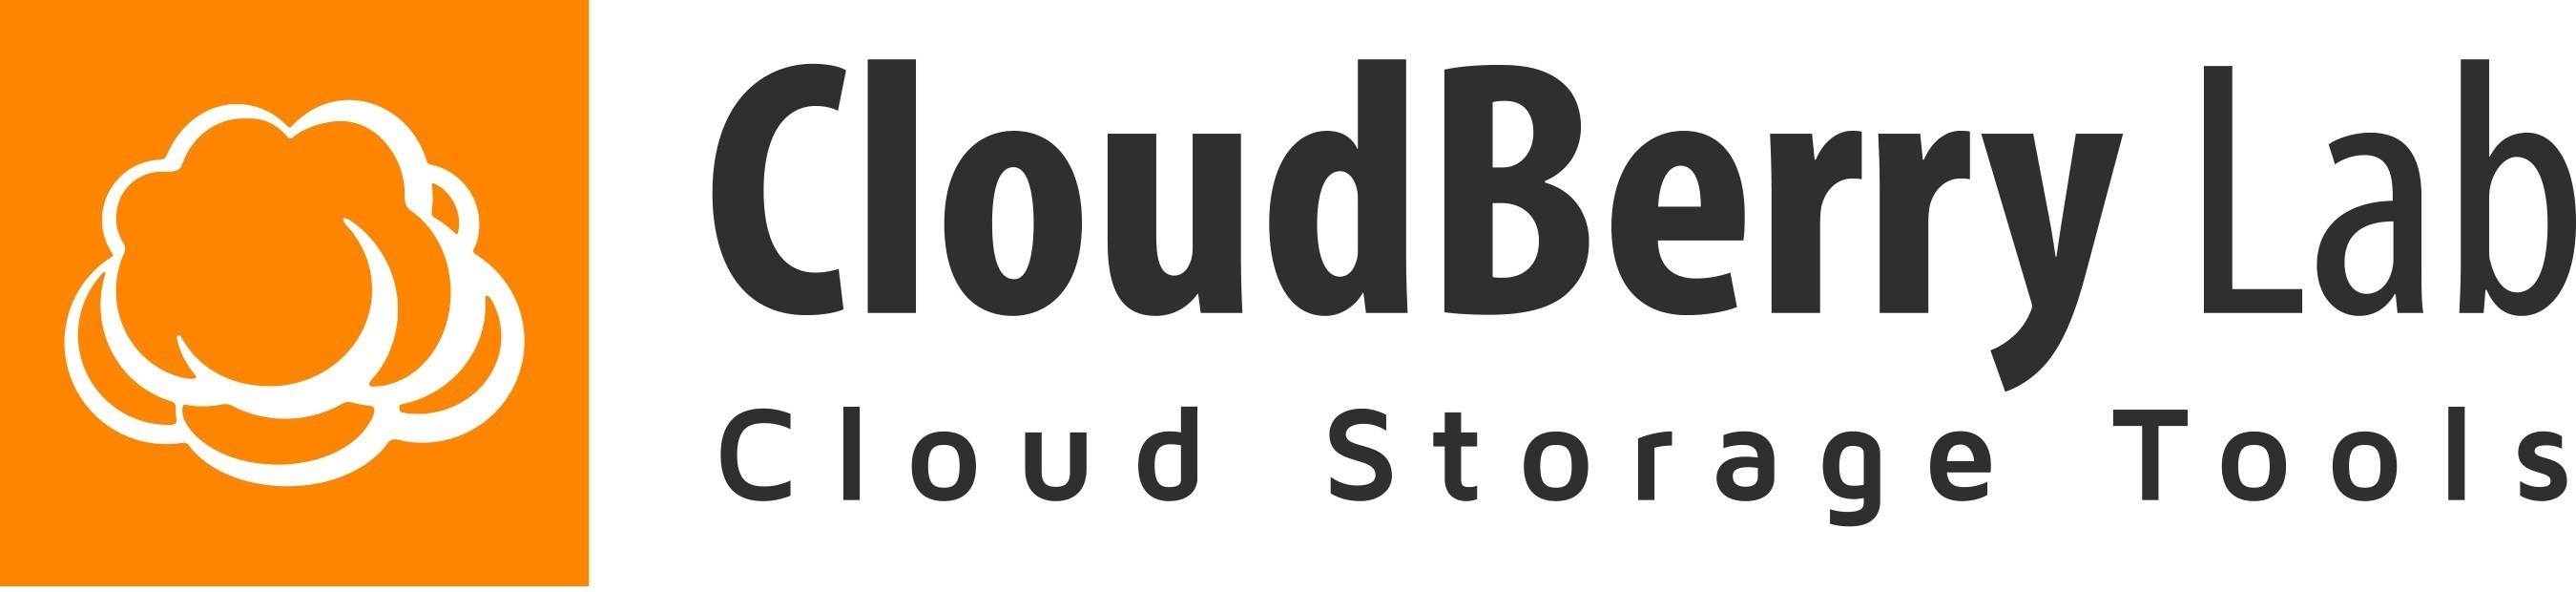 CloudBerry Lab(TM) provides cloud-based backup and file management services to small and mid-sized businesses (SMBs).